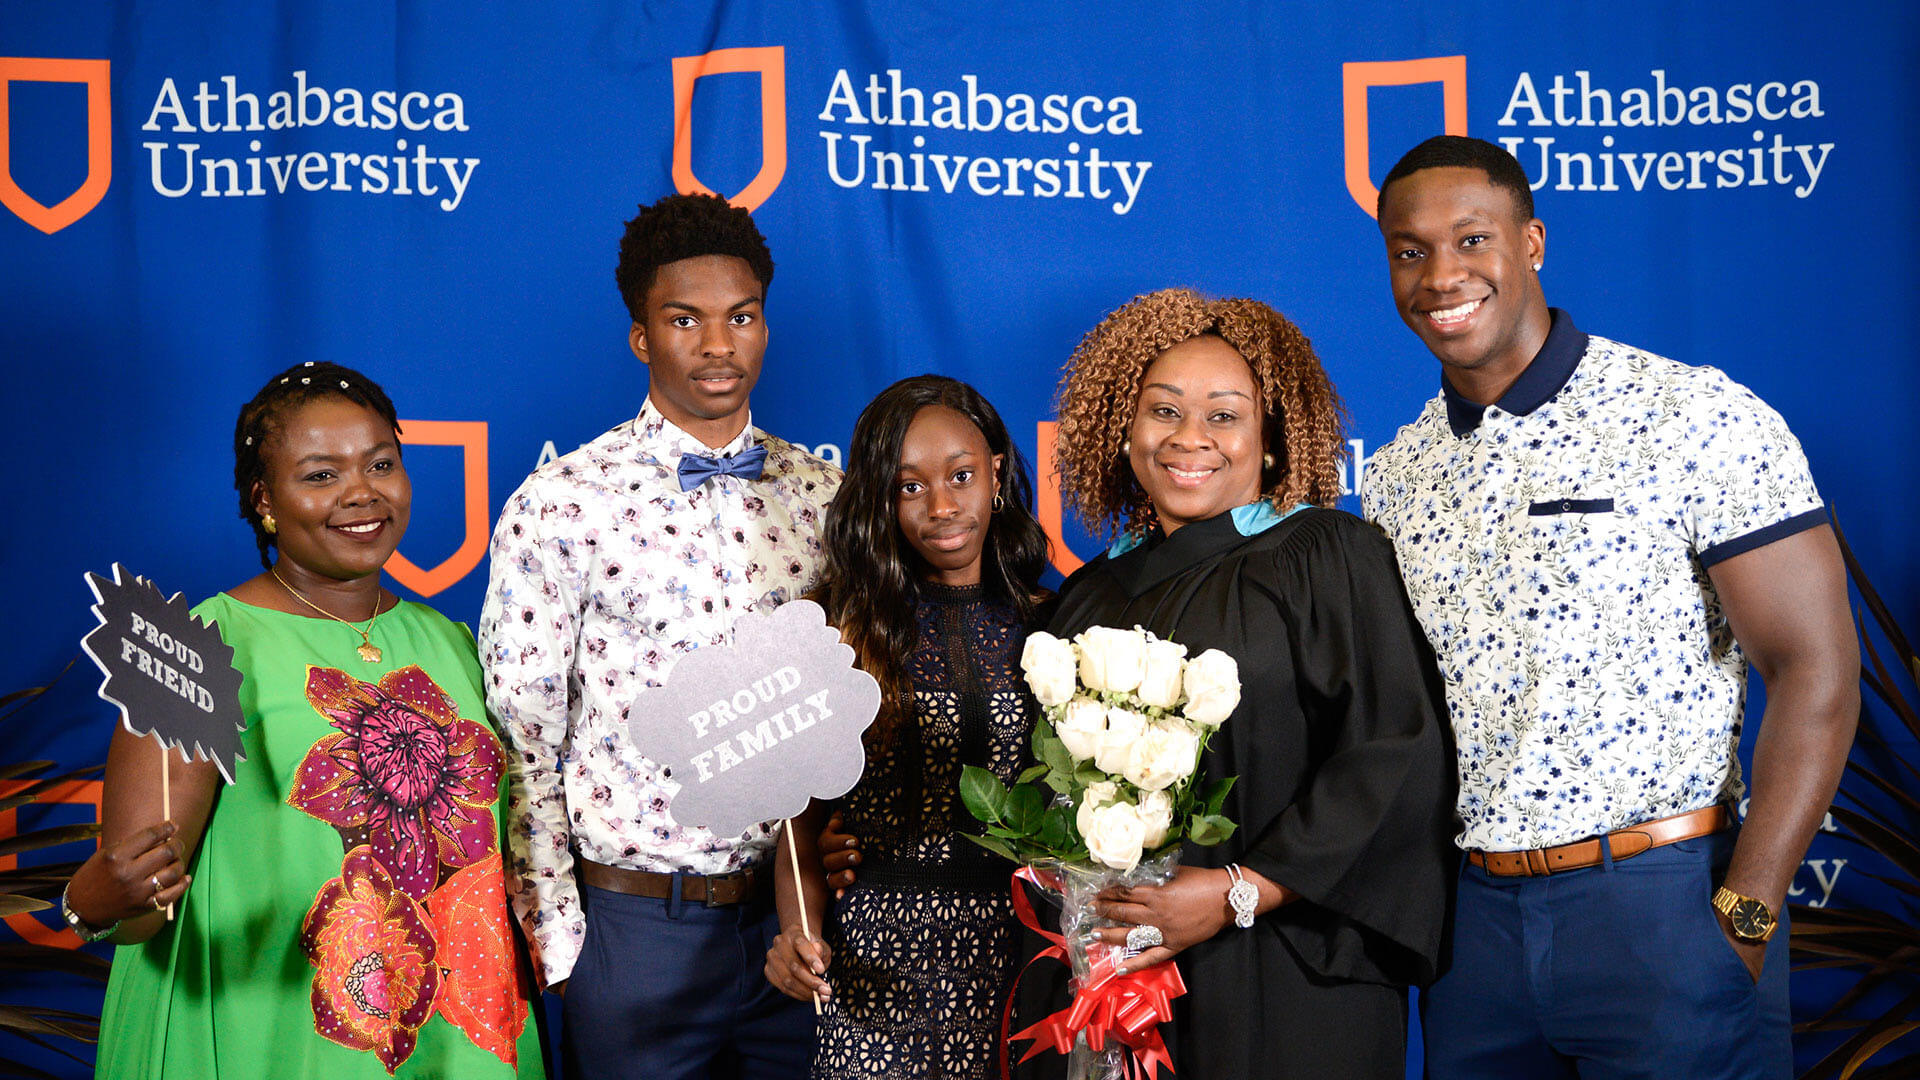 A new AU graduate celebrates convocation in 2015 with her proud family.